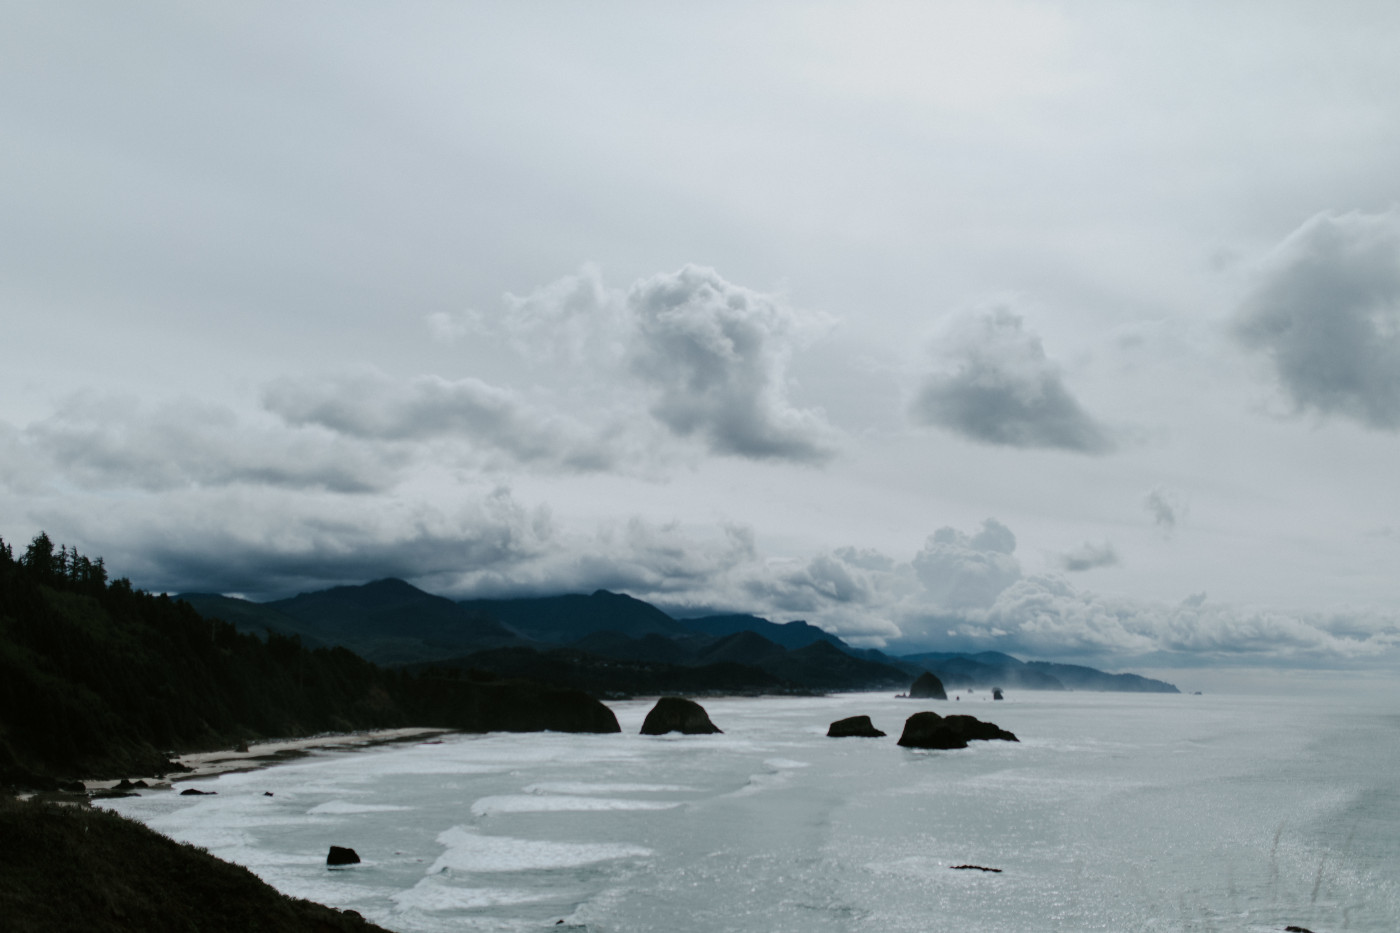 A view of Cannon Beach. Elopement wedding photography at Cannon Beach by Sienna Plus Josh.